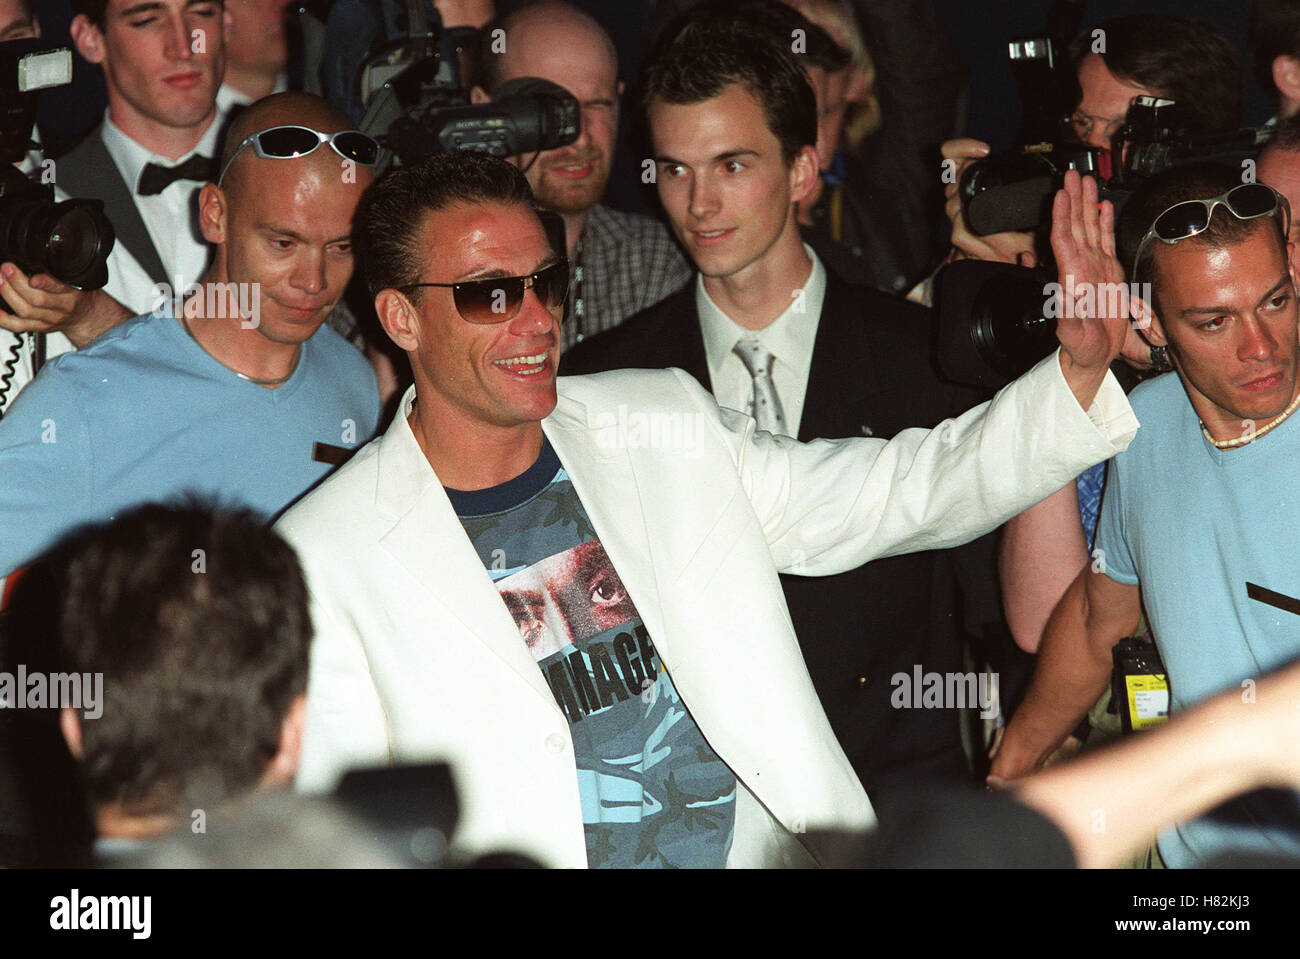 JEAN-CLAUDE VAN DAMME CANNES FILM FESTIVAL CANNES FRANCE EUROPE 14 May 2001 Stock Photo